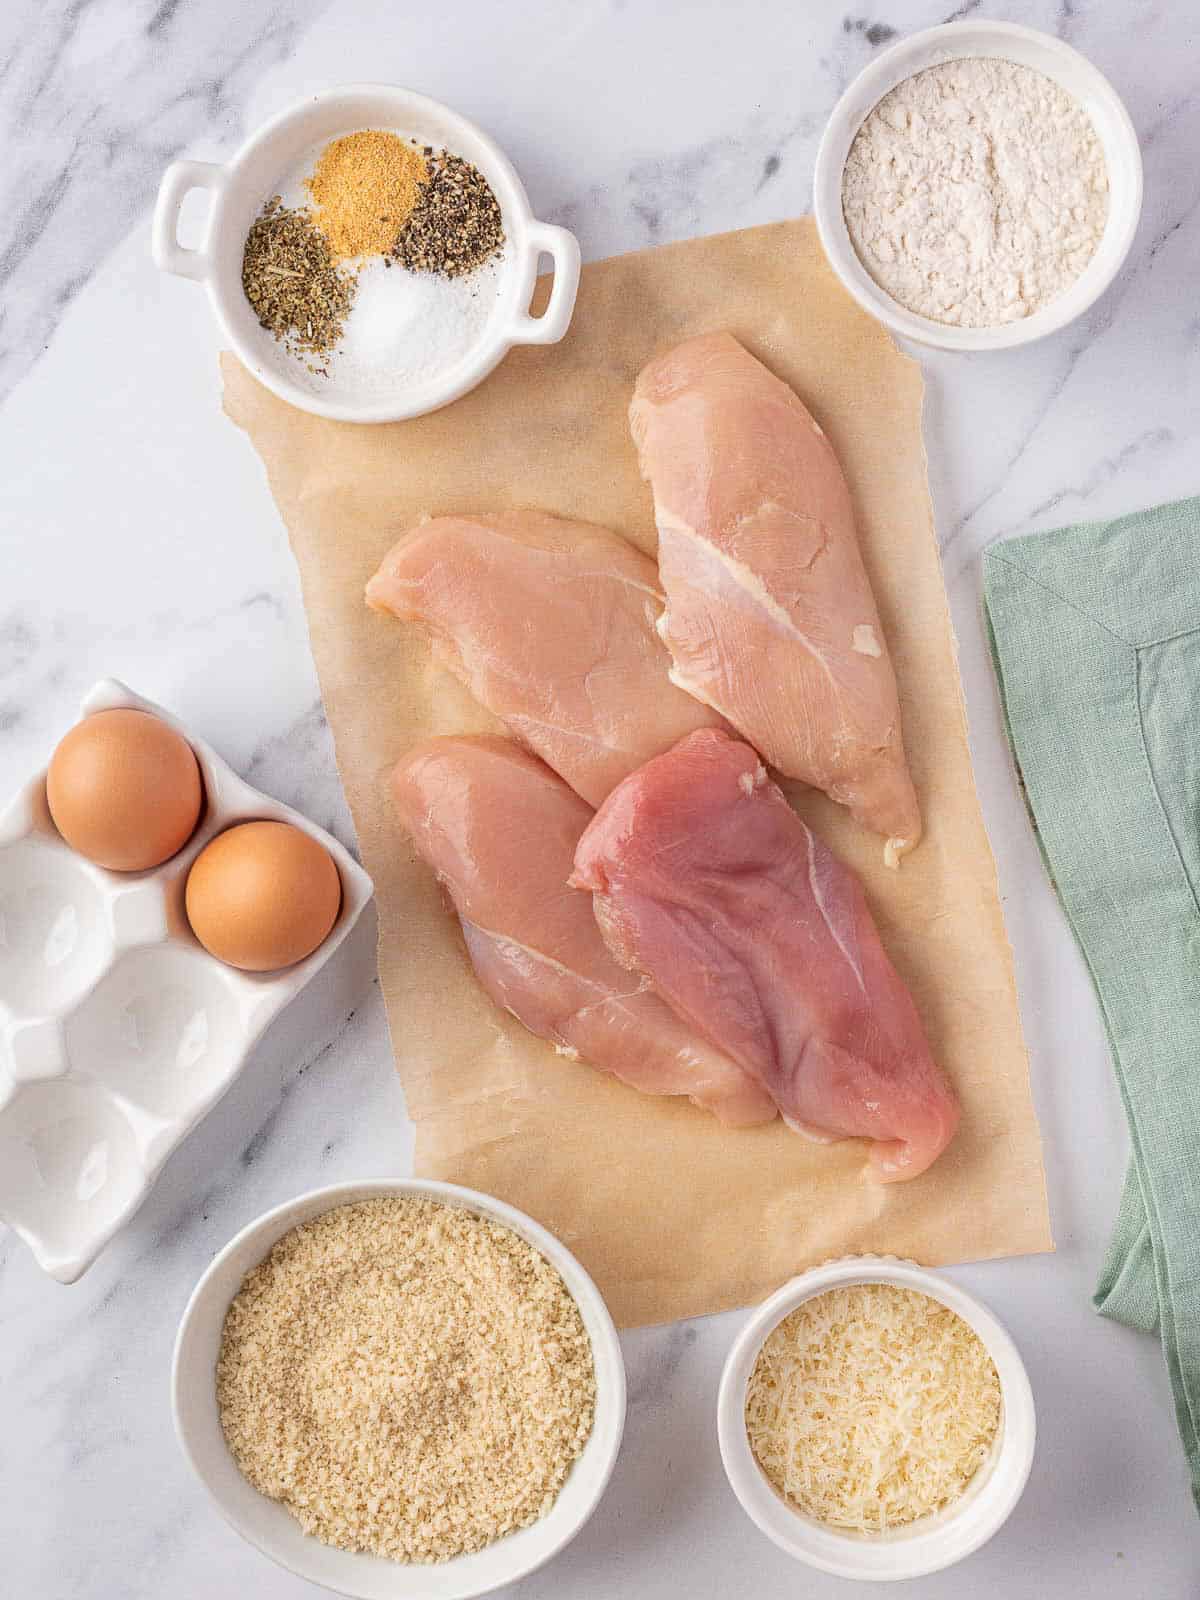 Ingredients for parmesan crusted chicken.